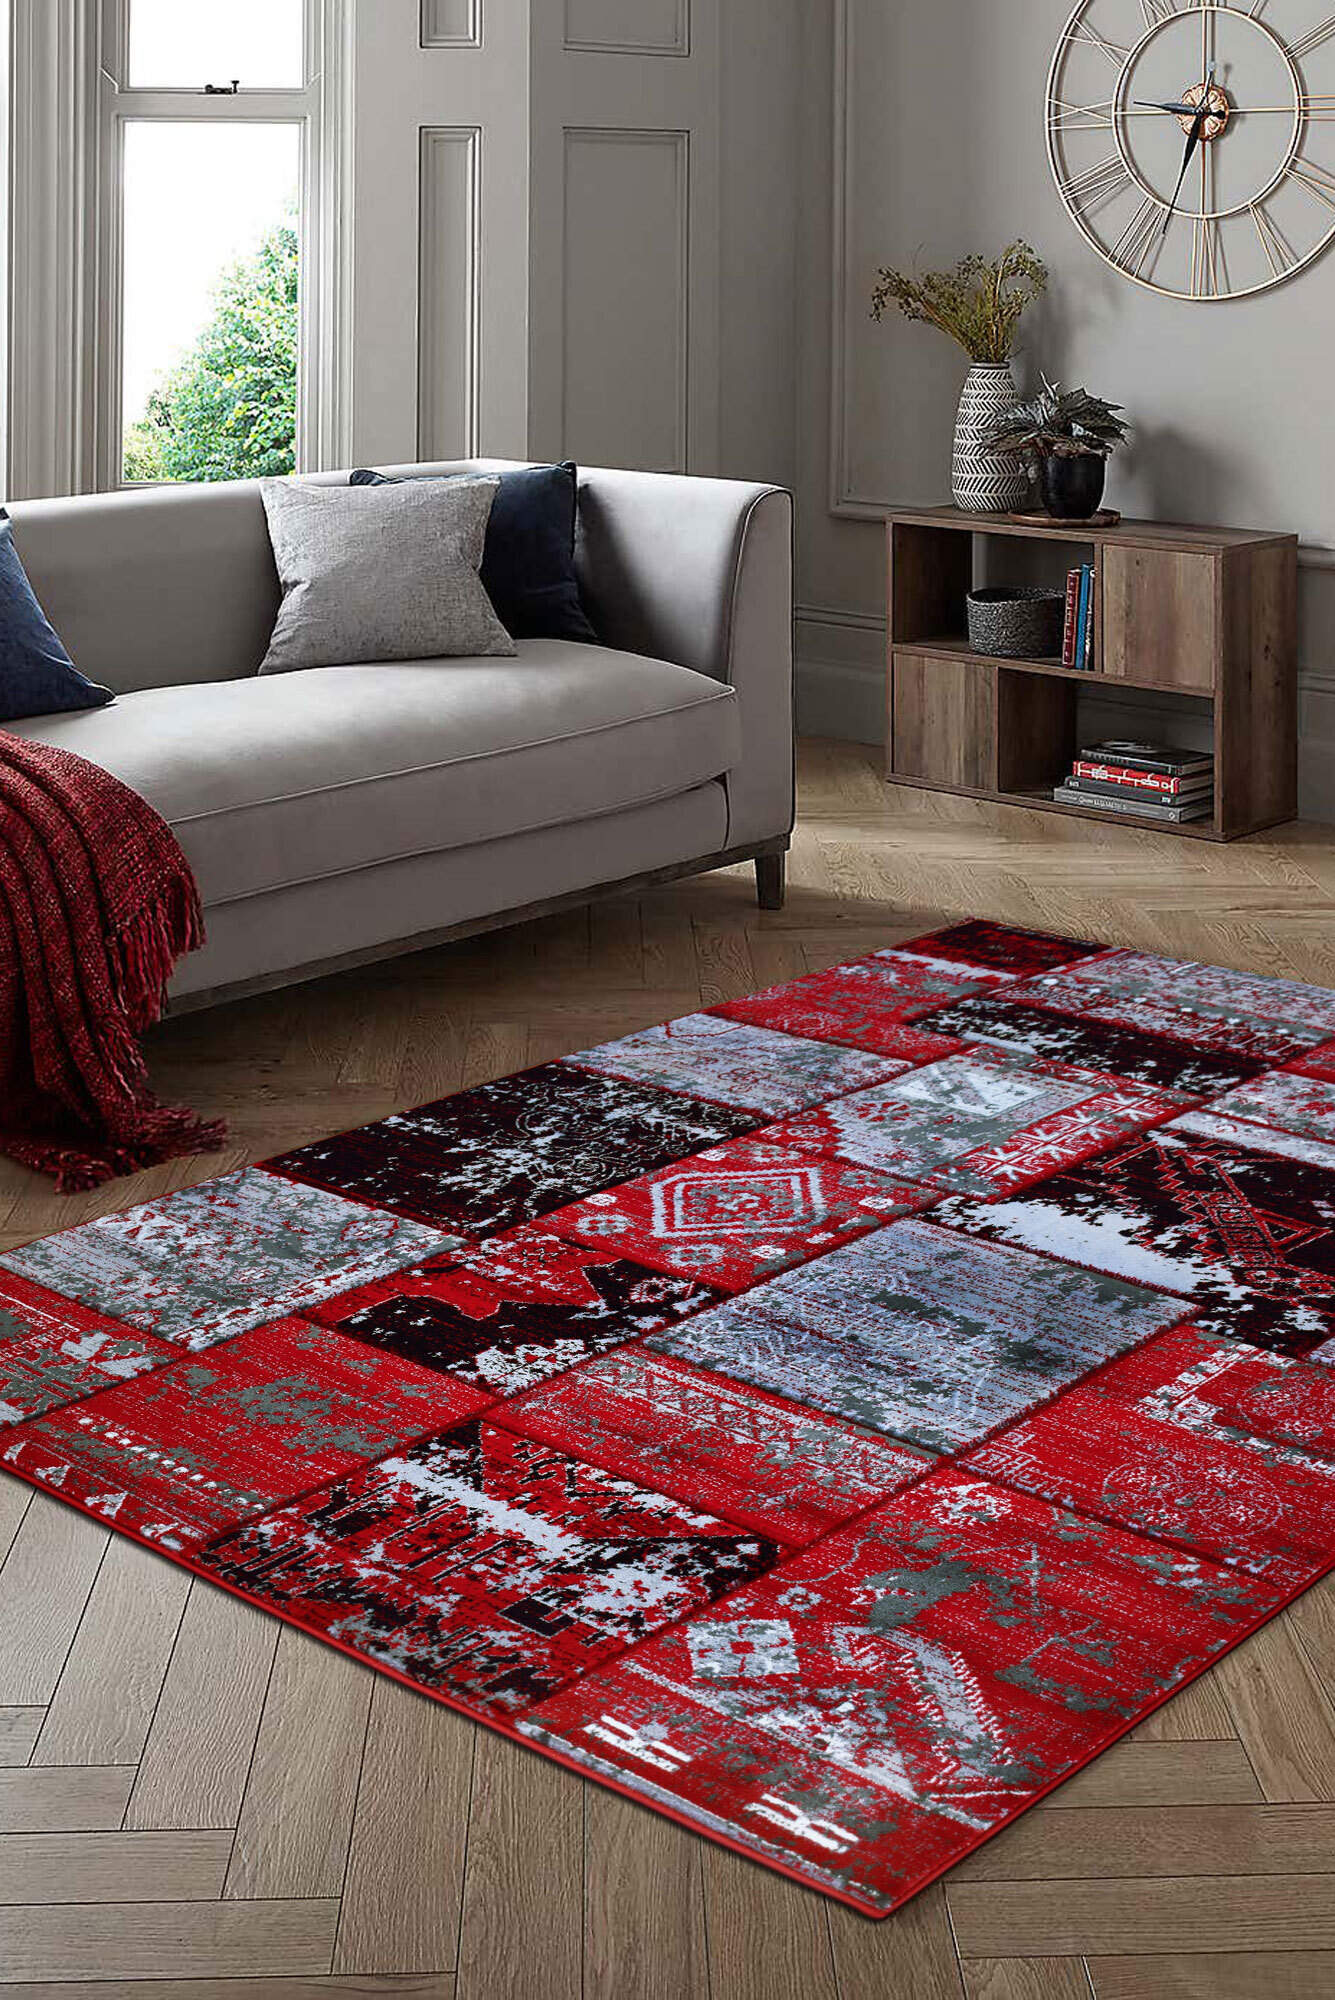 Paris Carved Red Patchwork Rug(Size 180 x 120cm)